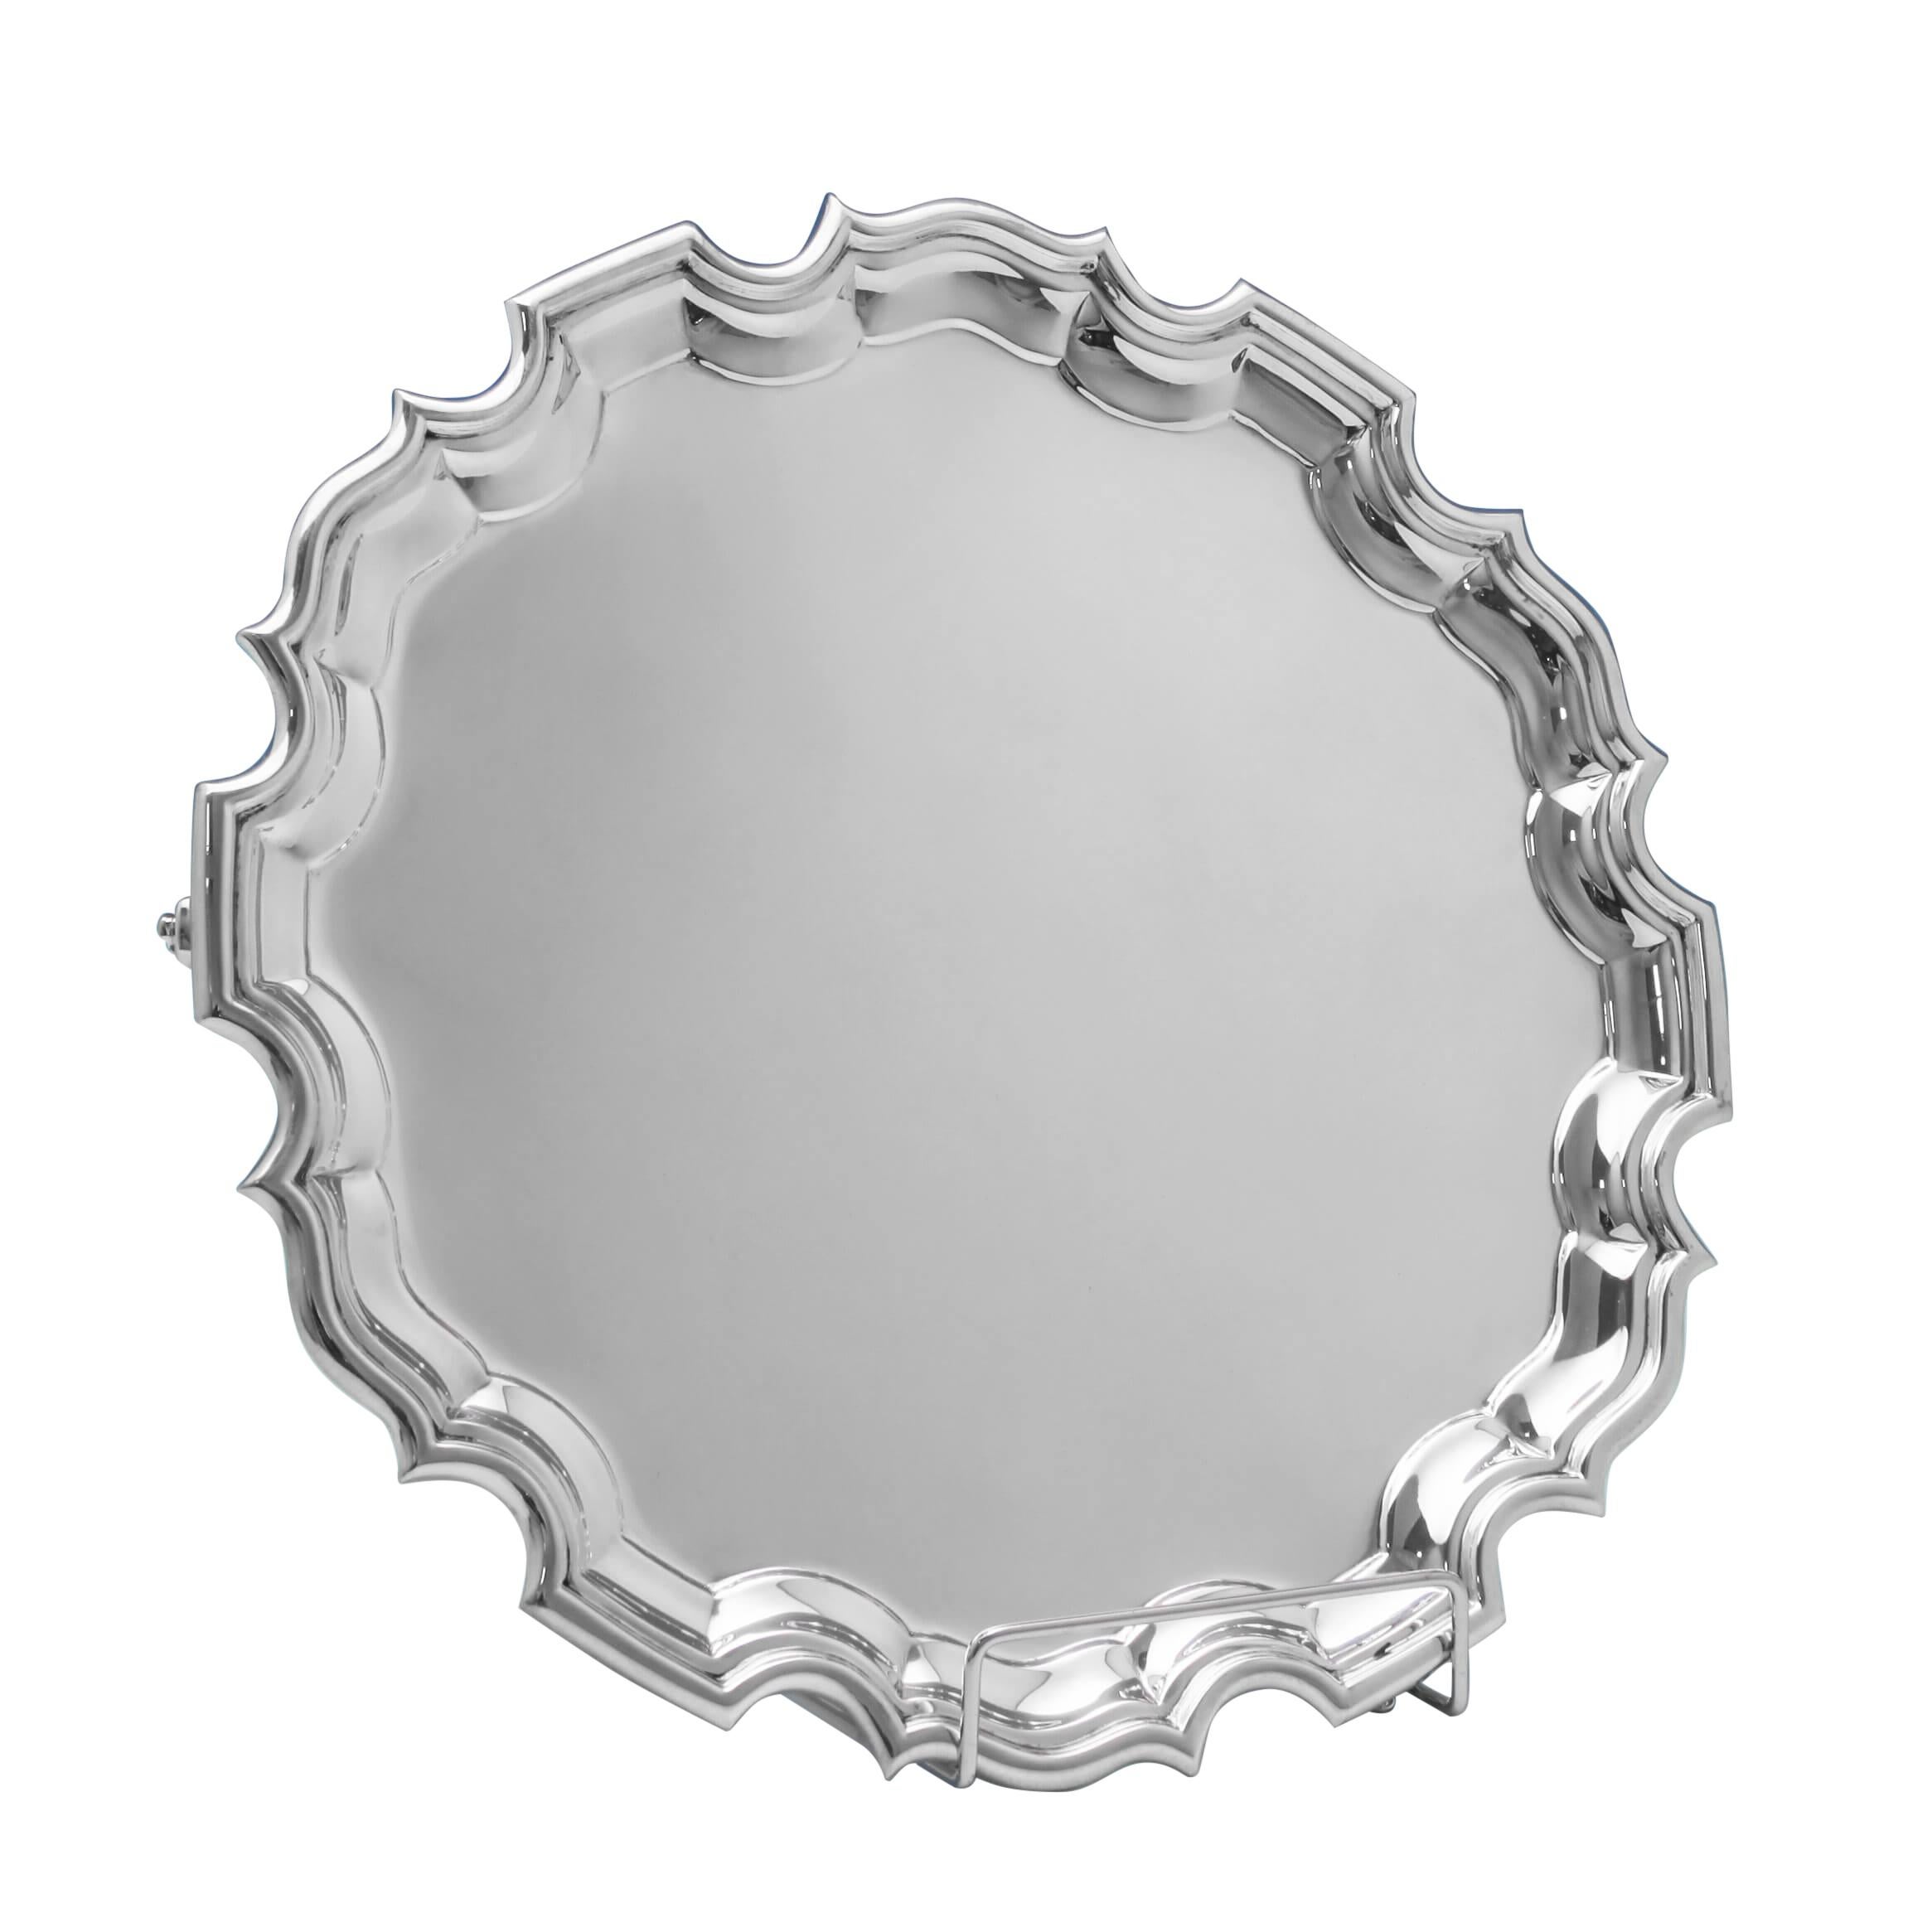 Irish Chippendale Border Sterling Silver Salver by West & Son of Dublin